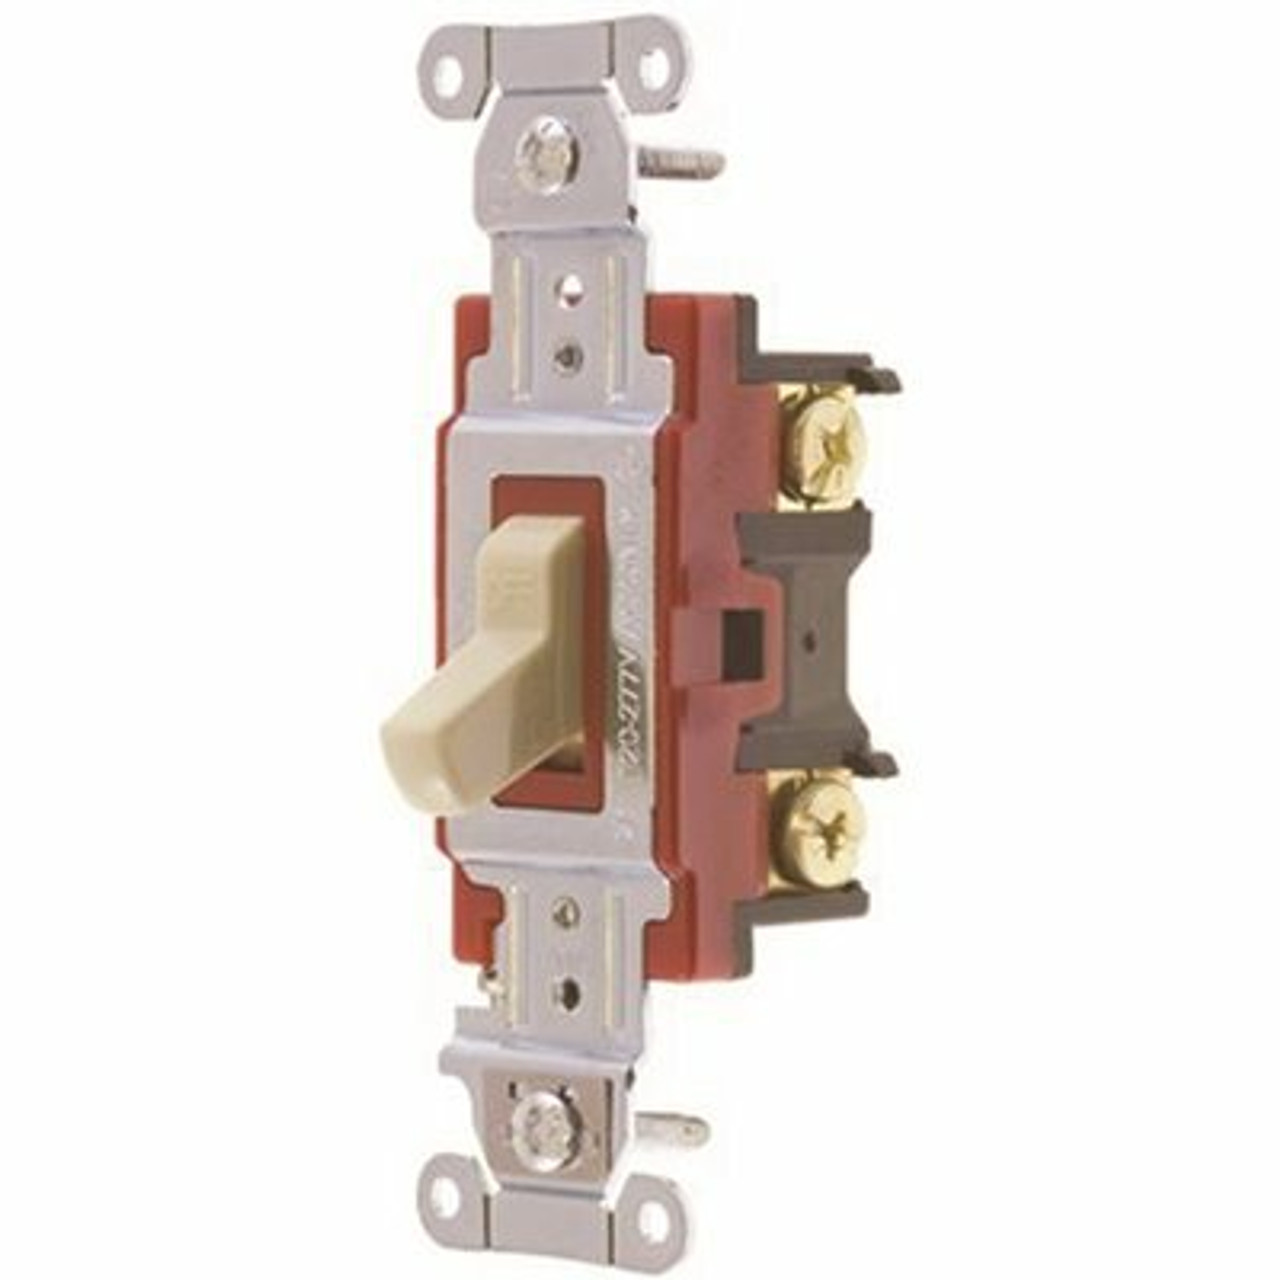 Hubbell Wiring Pro Series 20 Amp Double Pole Hubbell Toggle Switch, Ivory